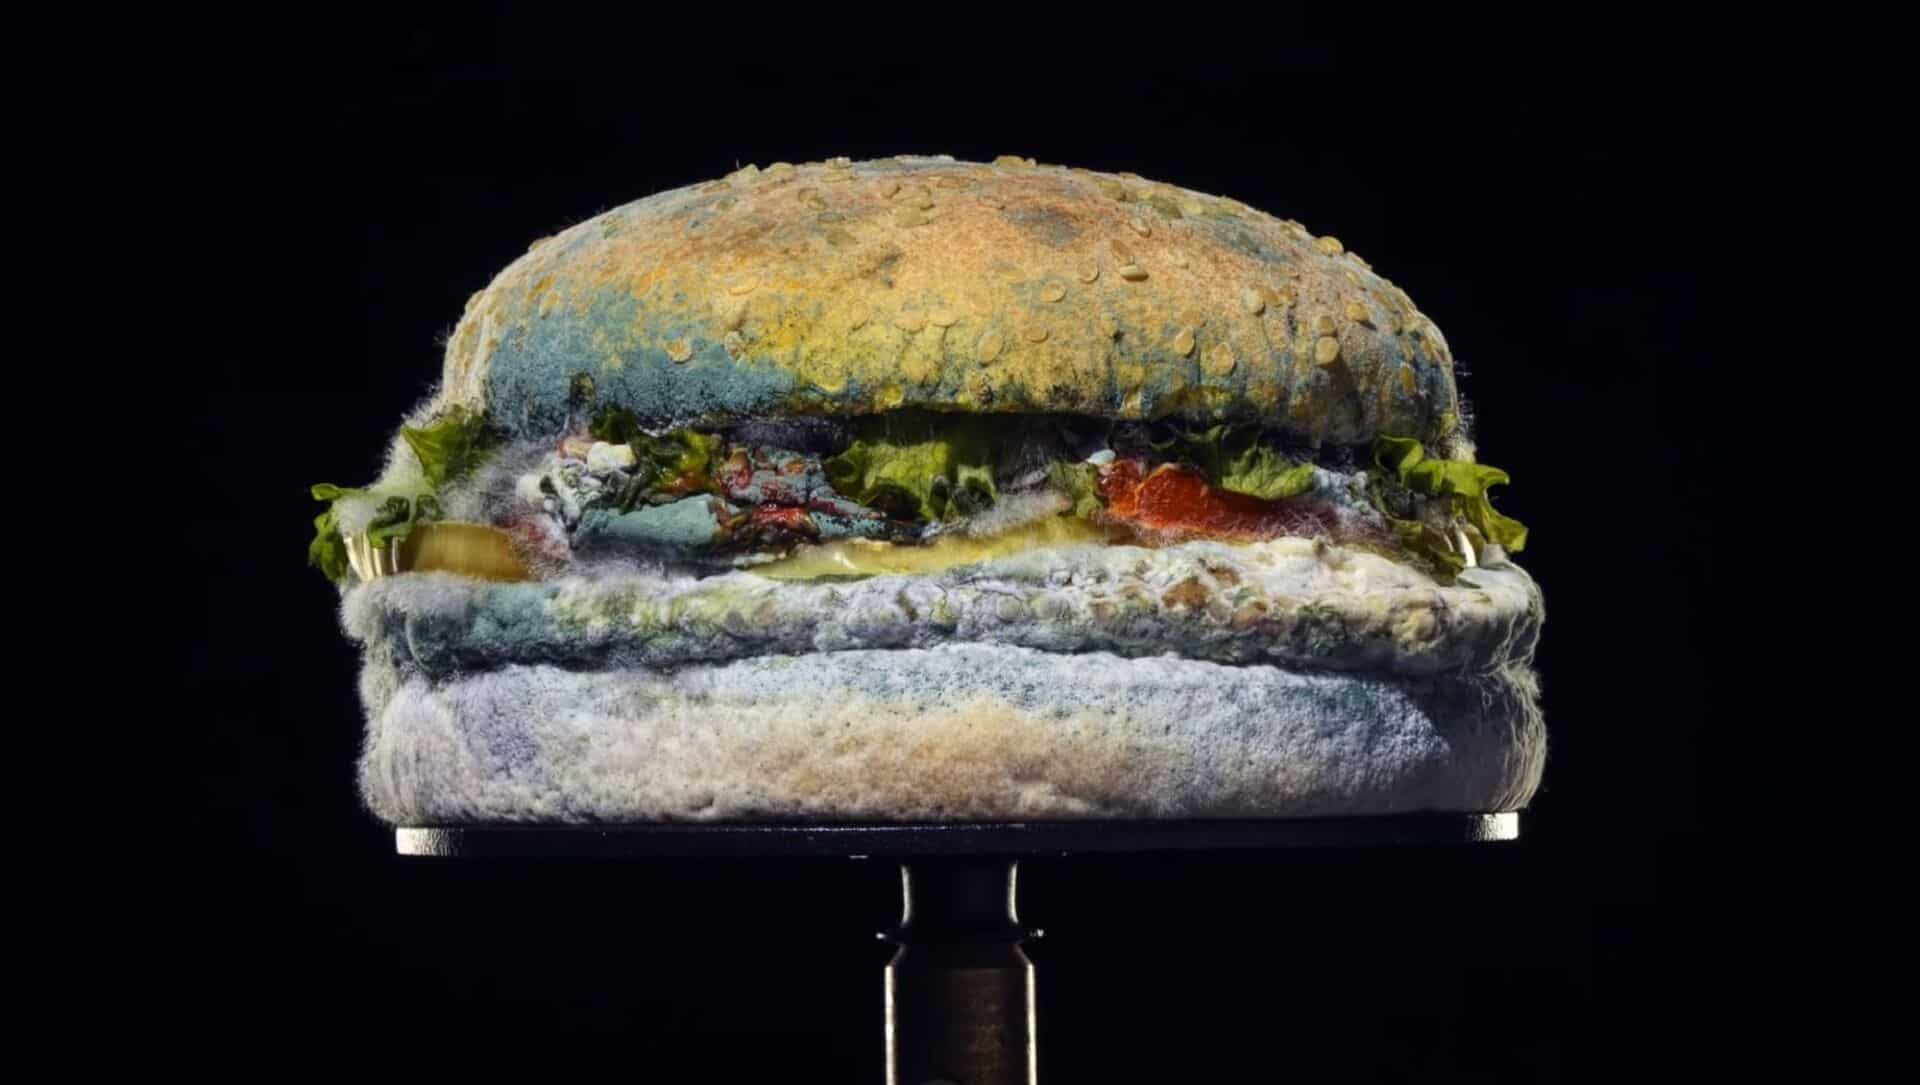 Decomposed hamburger, similar to the one consumed by many prisoners in the US. File Photo.